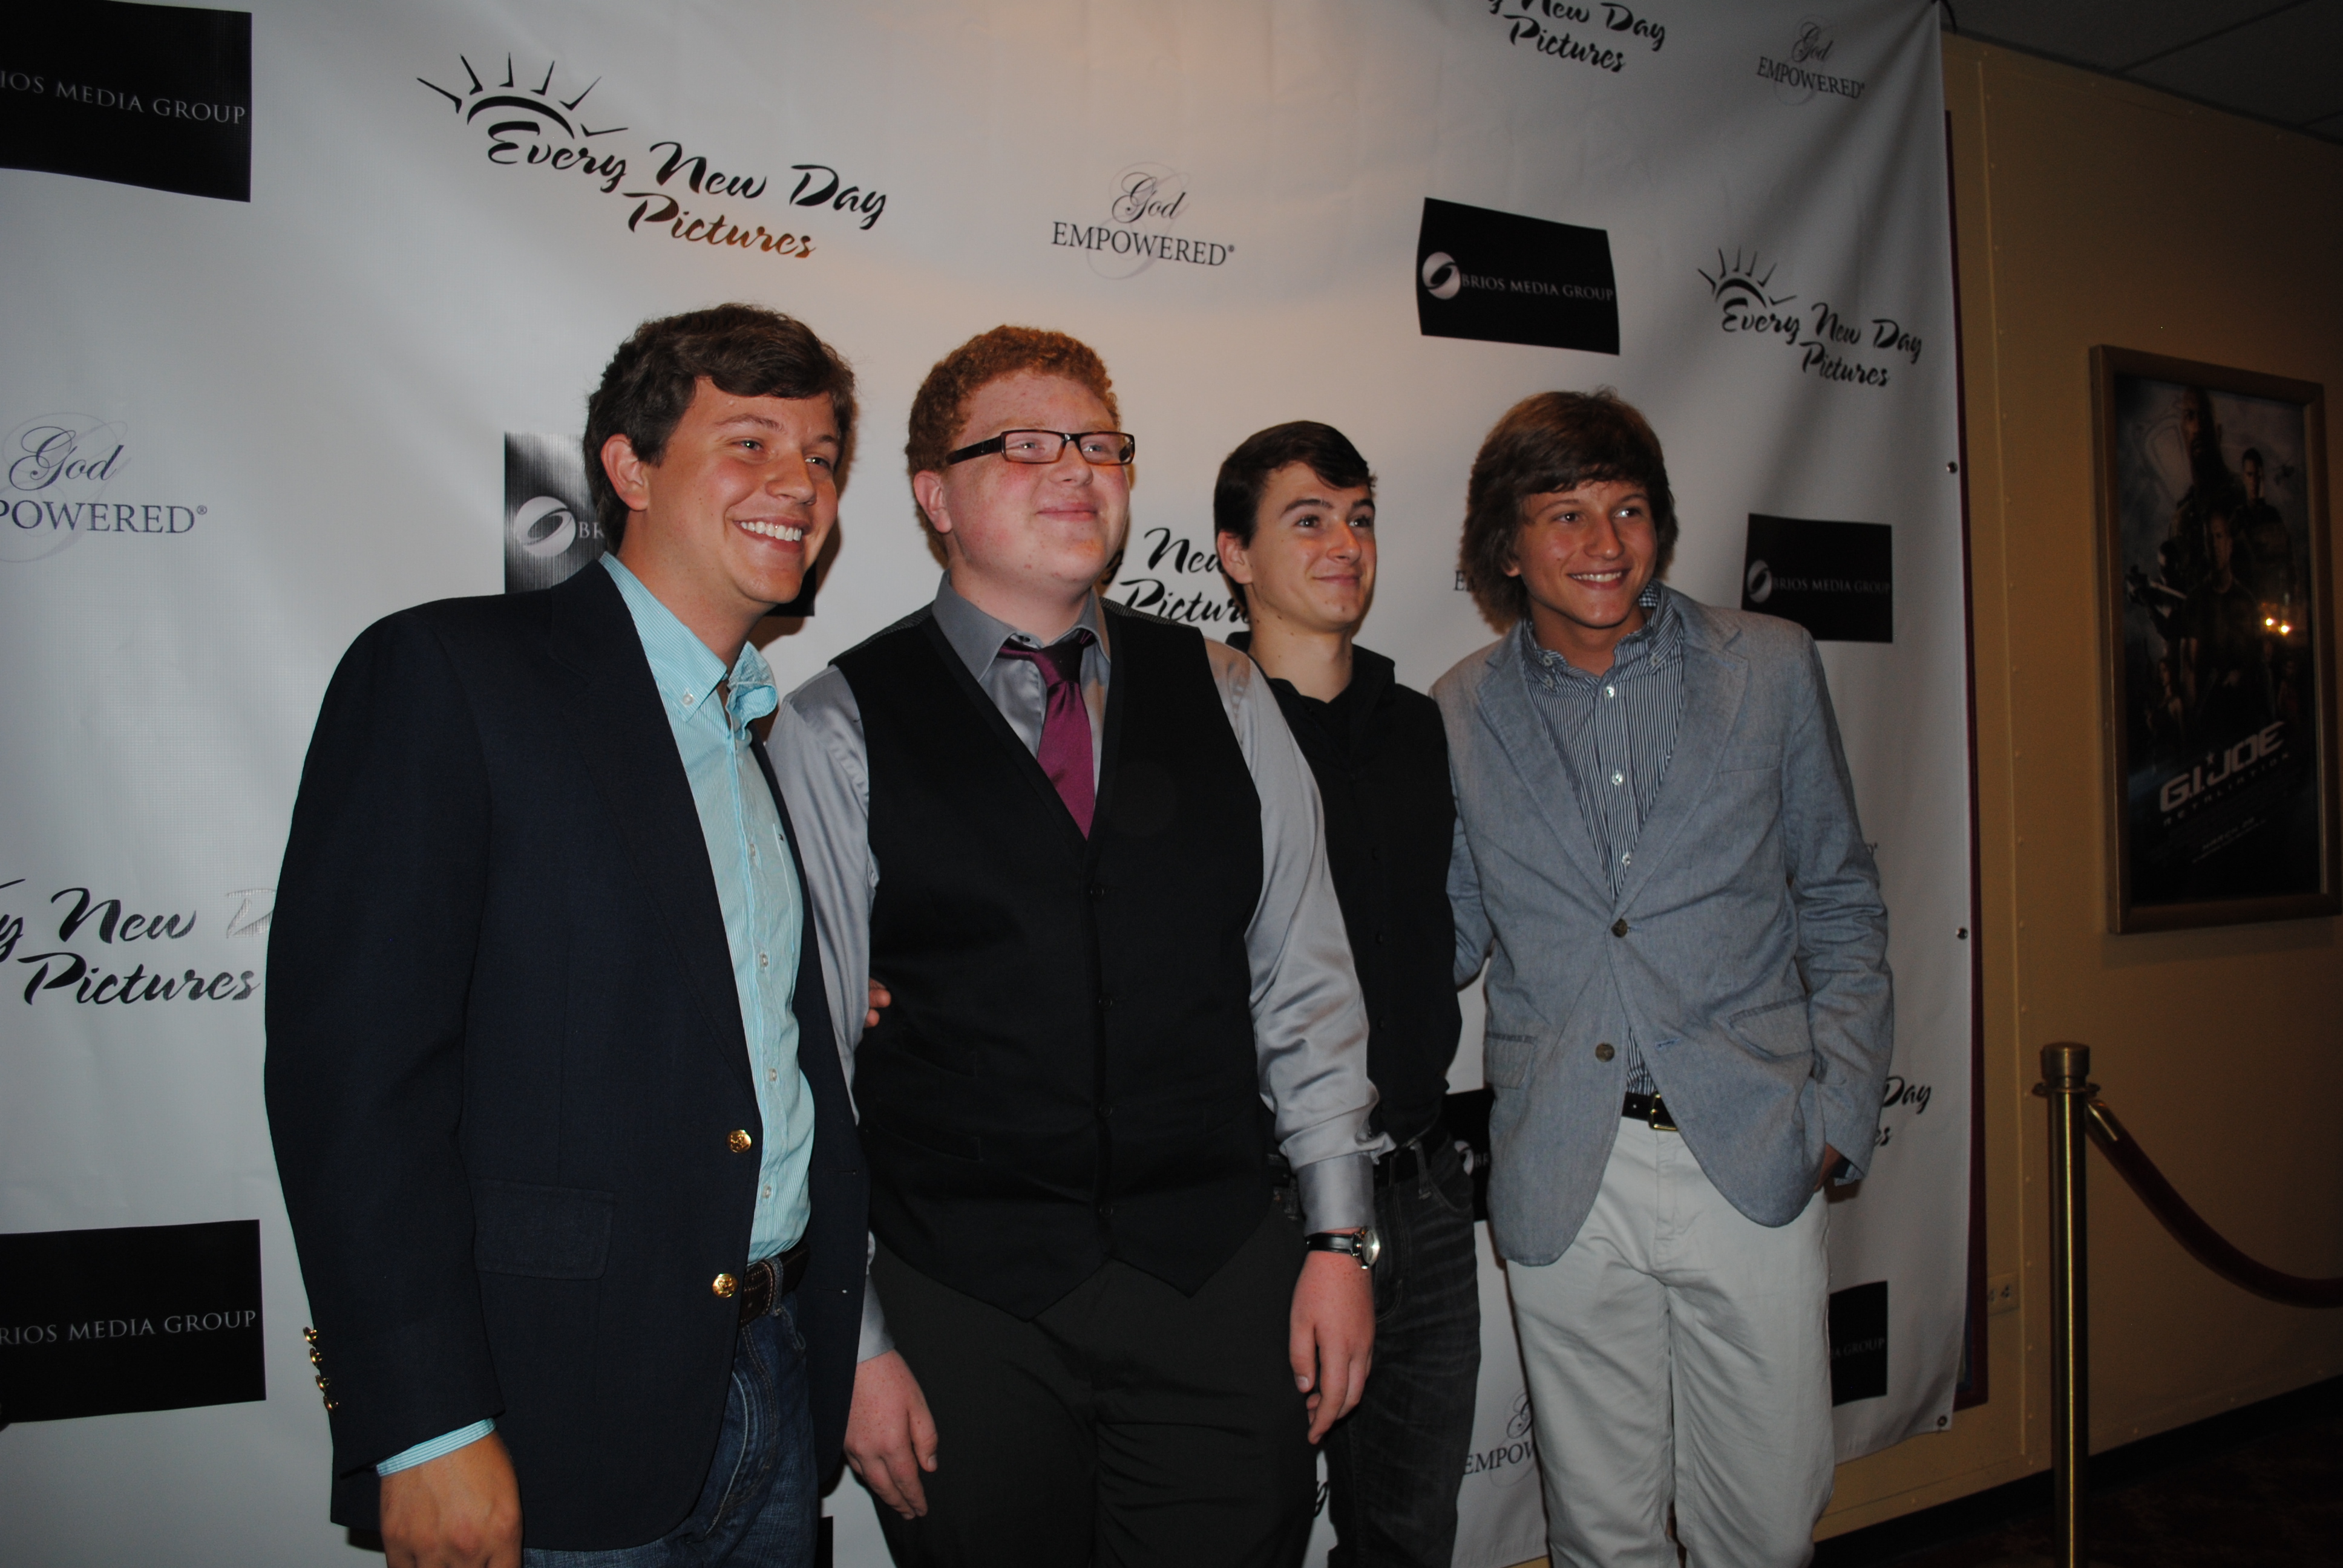 Secrets in the Fall Premiere - Ryan Williams, Luke Ptacek, Voltaire Council and Andrew Williams